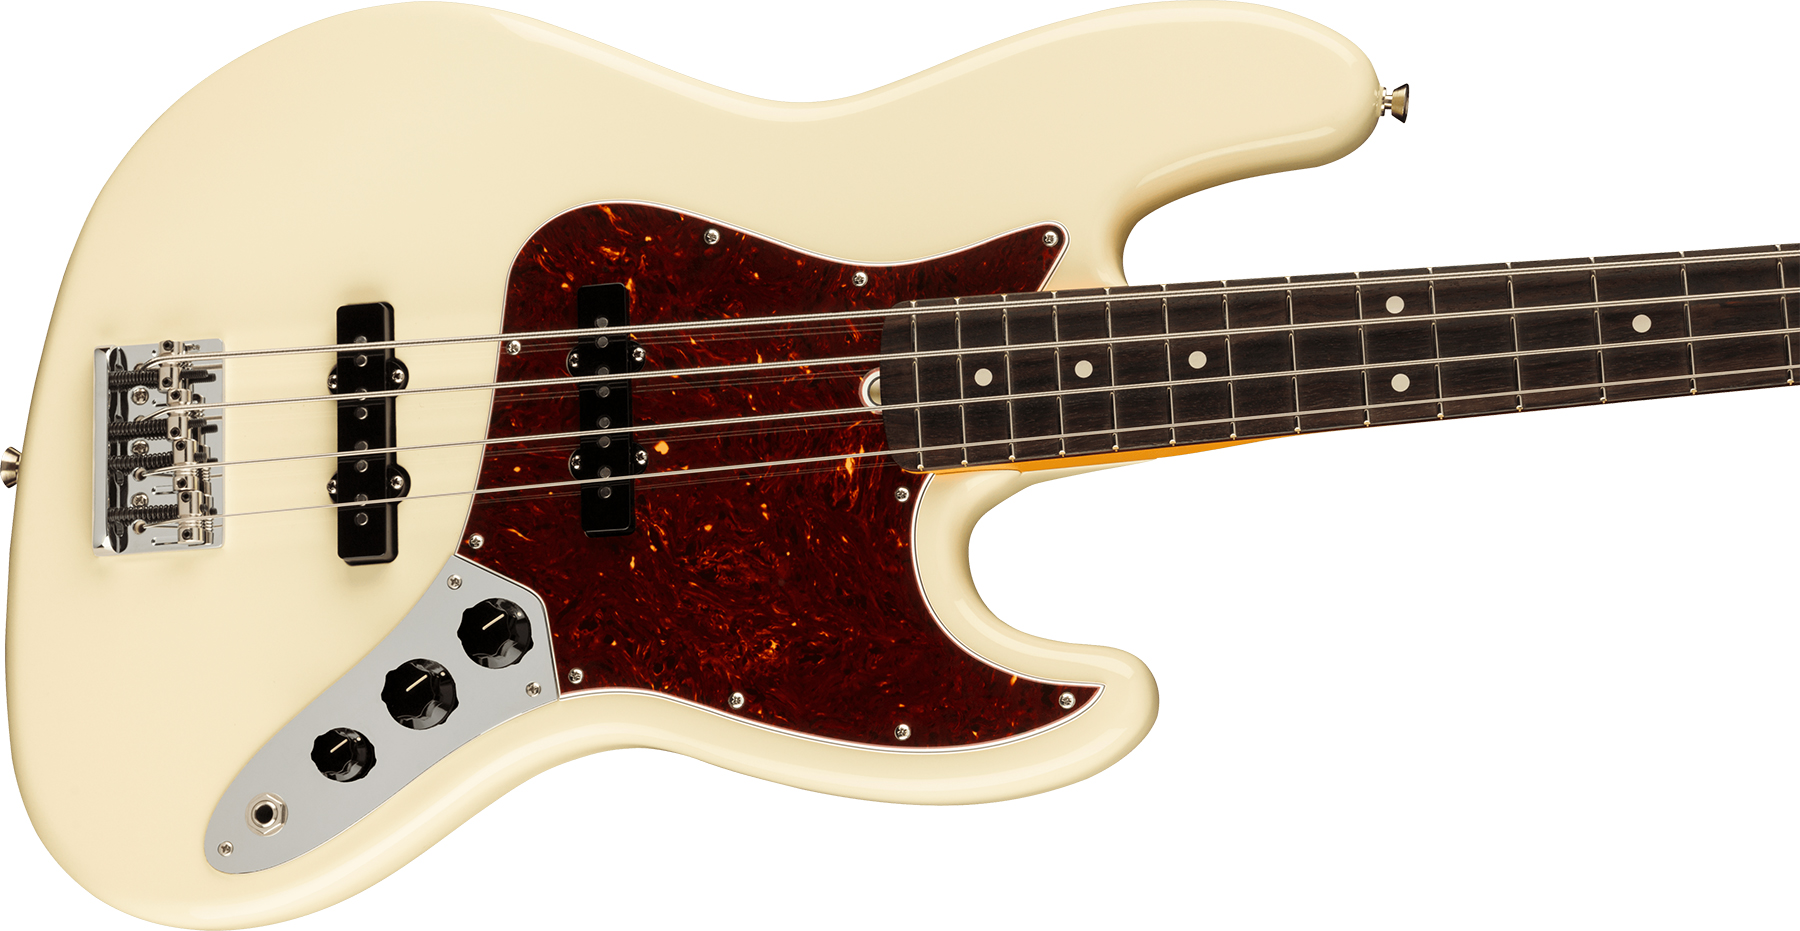 Fender Jazz Bass American Professional Ii Usa Rw - Olympic White - Basse Électrique Solid Body - Variation 2